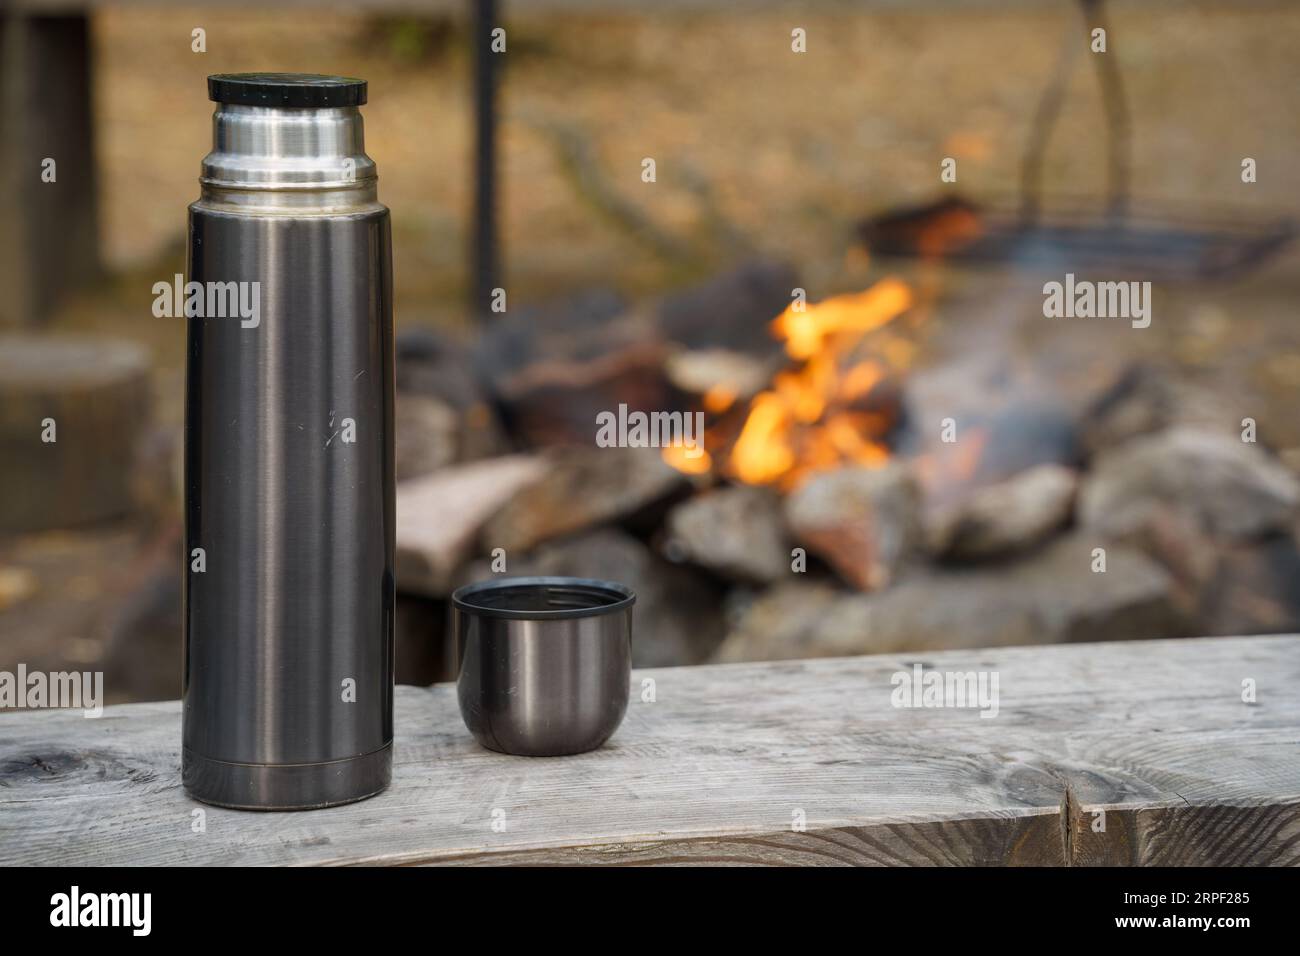 Scratched steel thermos bottle on a wooden bench next to the campfire Stock Photo